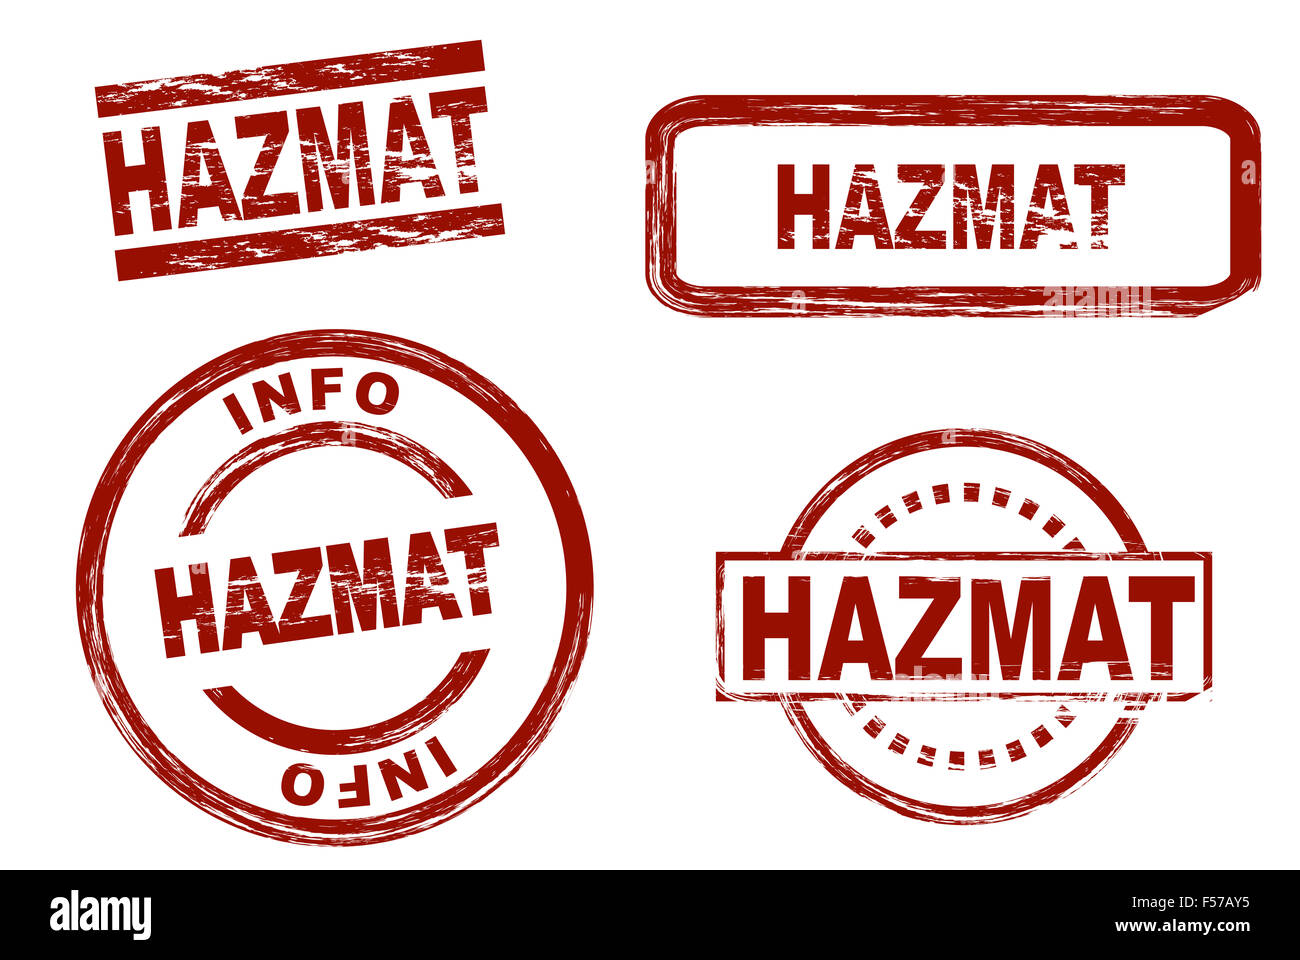 Set of stylized stamps showing the term HAZMAT. All on white background. Stock Photo